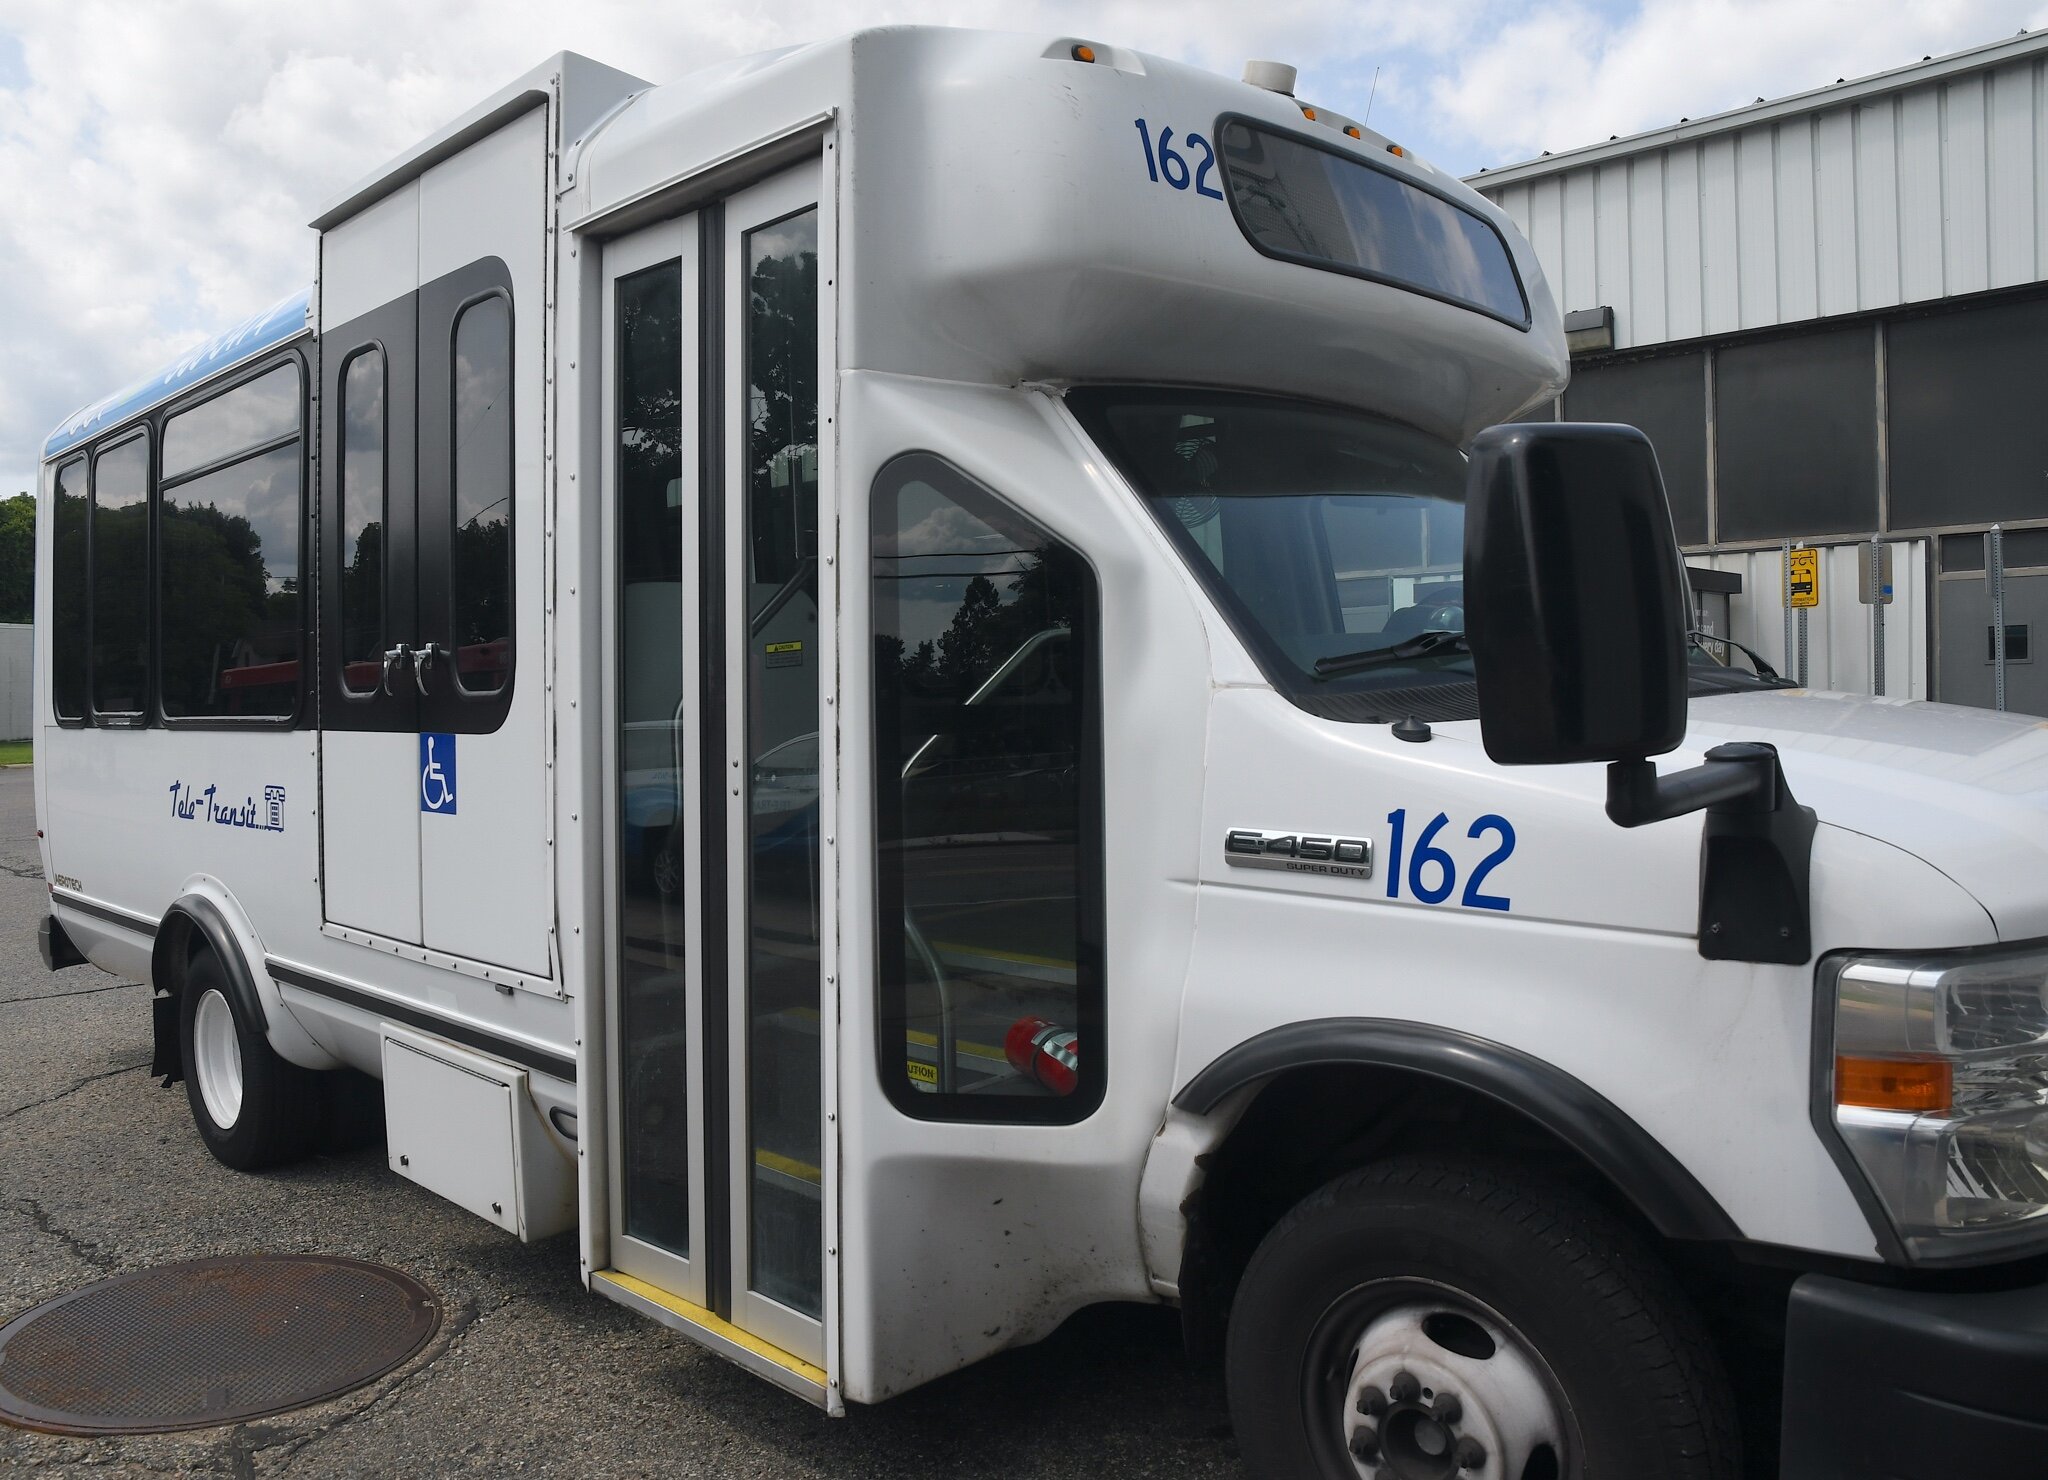 A vehicle in the fleet operated by BC Transit.